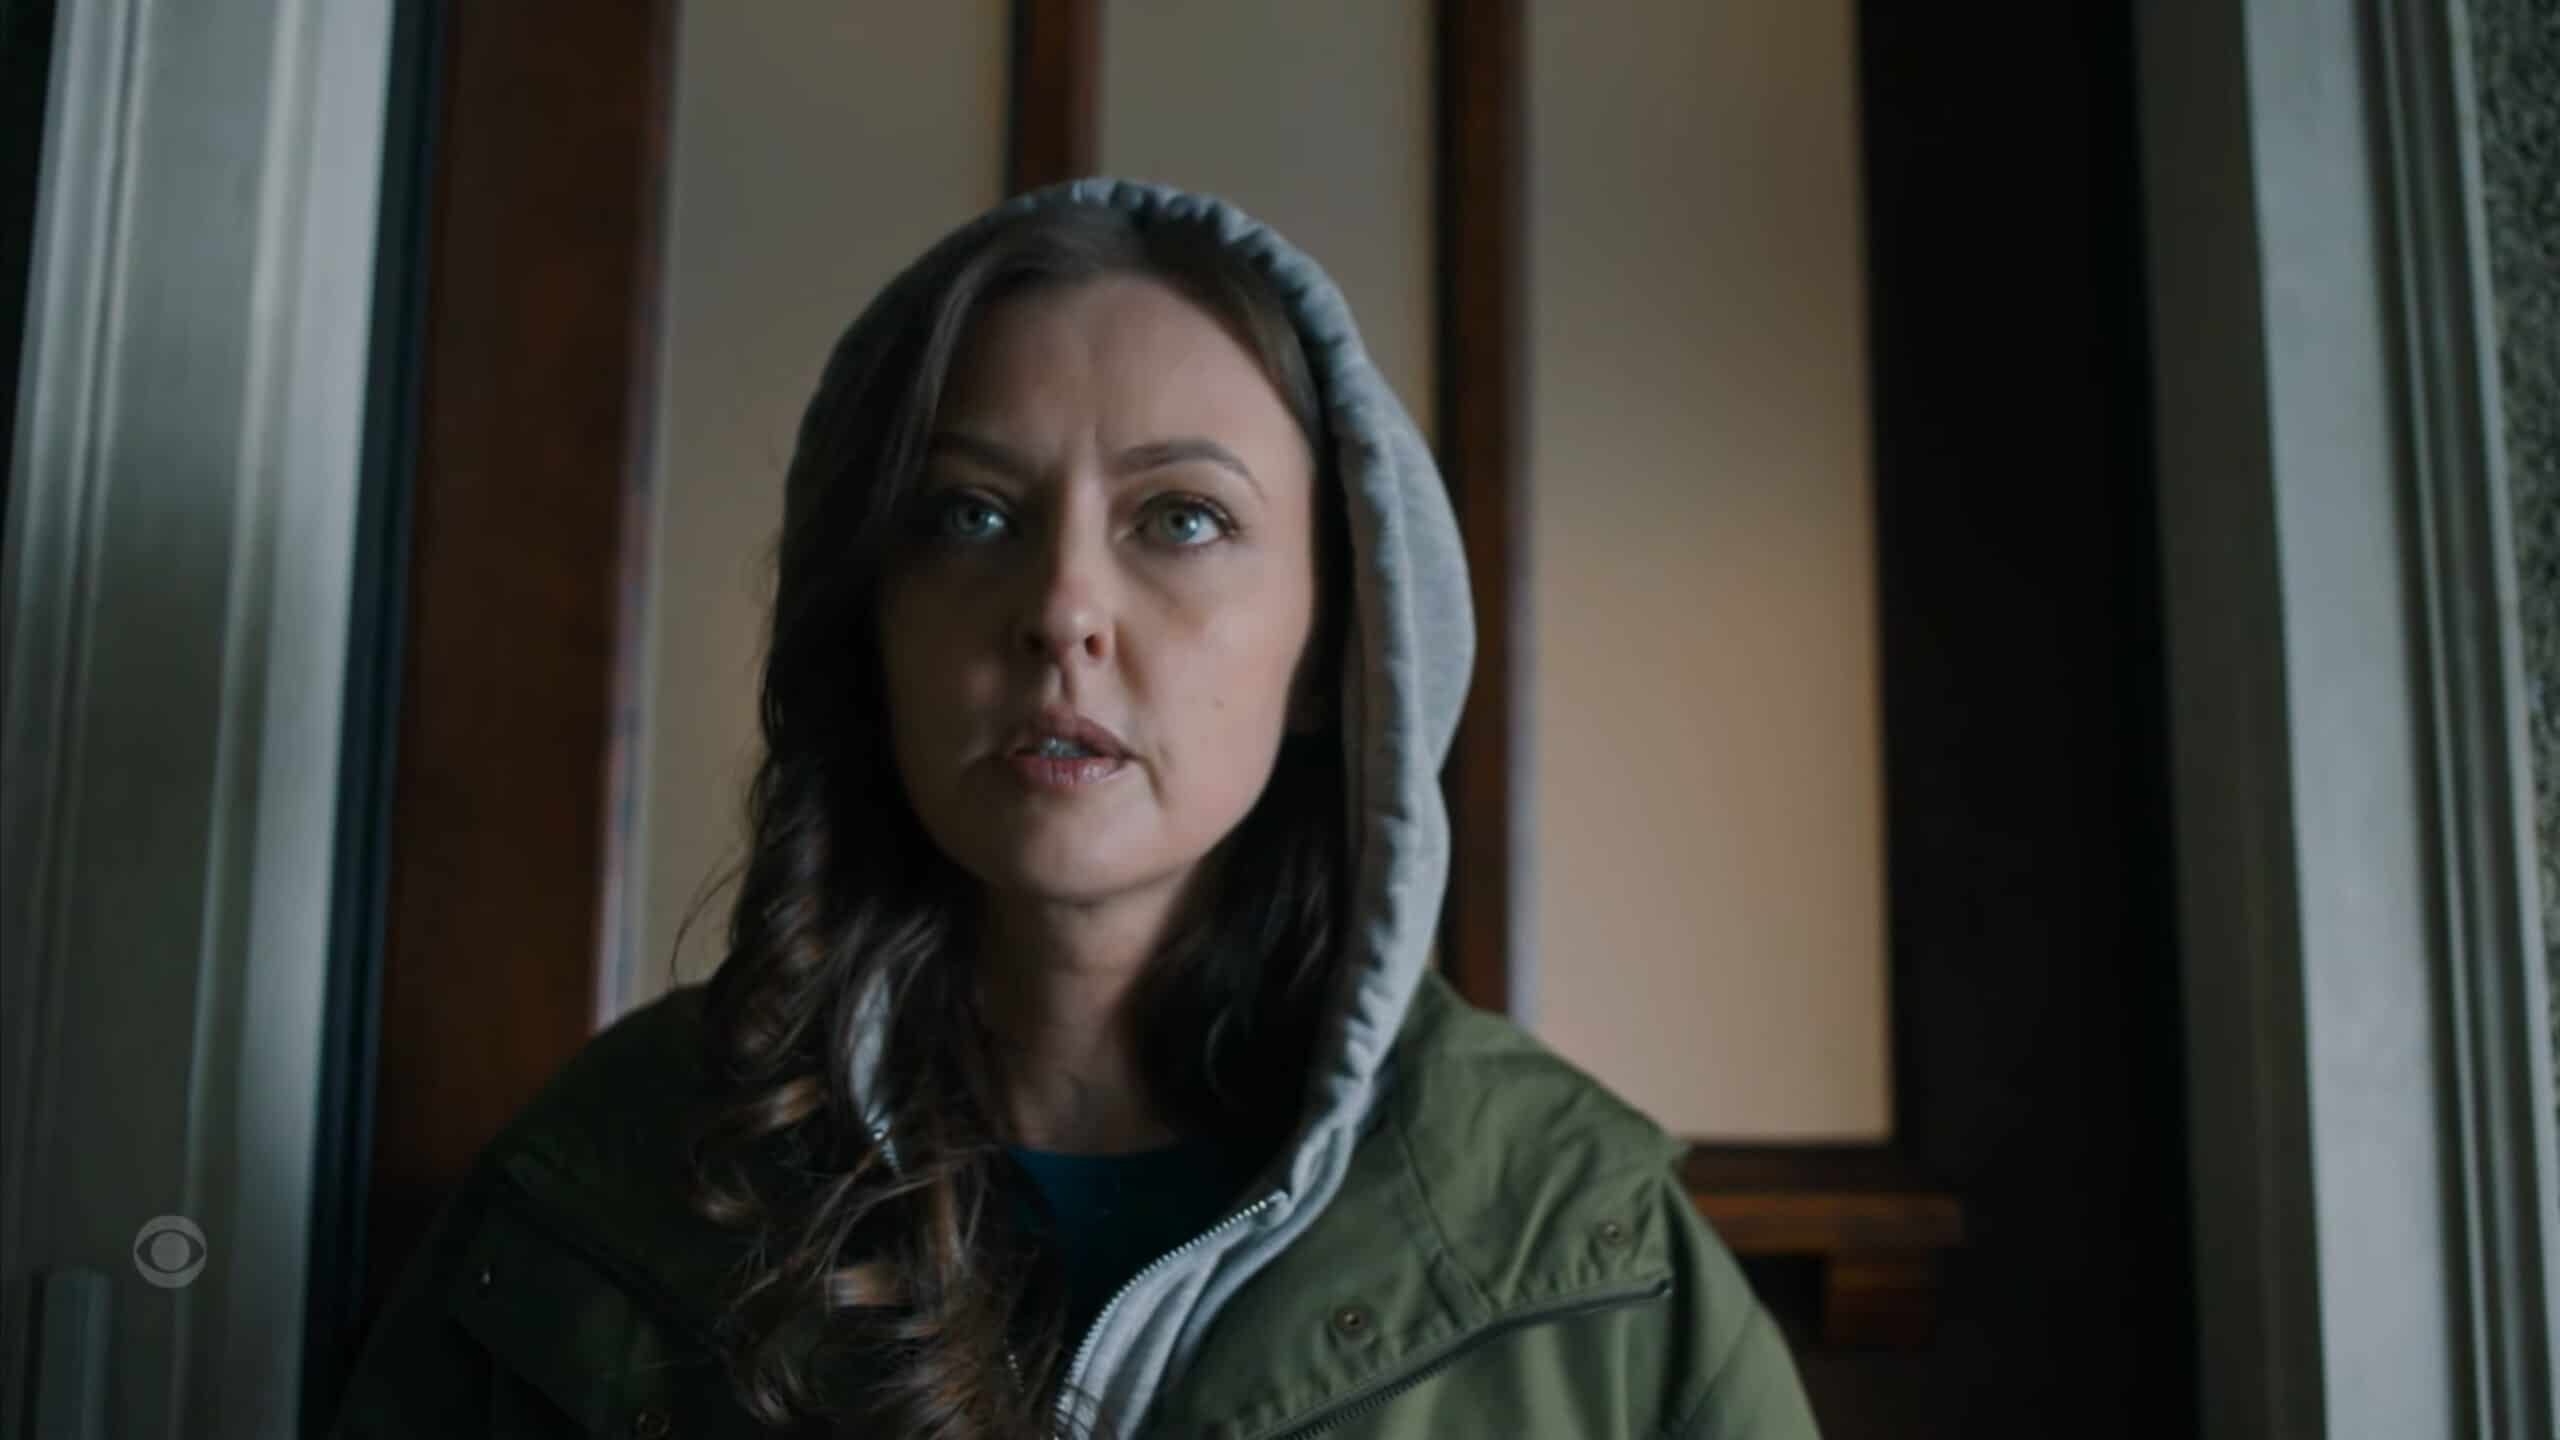 Mallory (Katharine Isabelle) surprised Colter found her